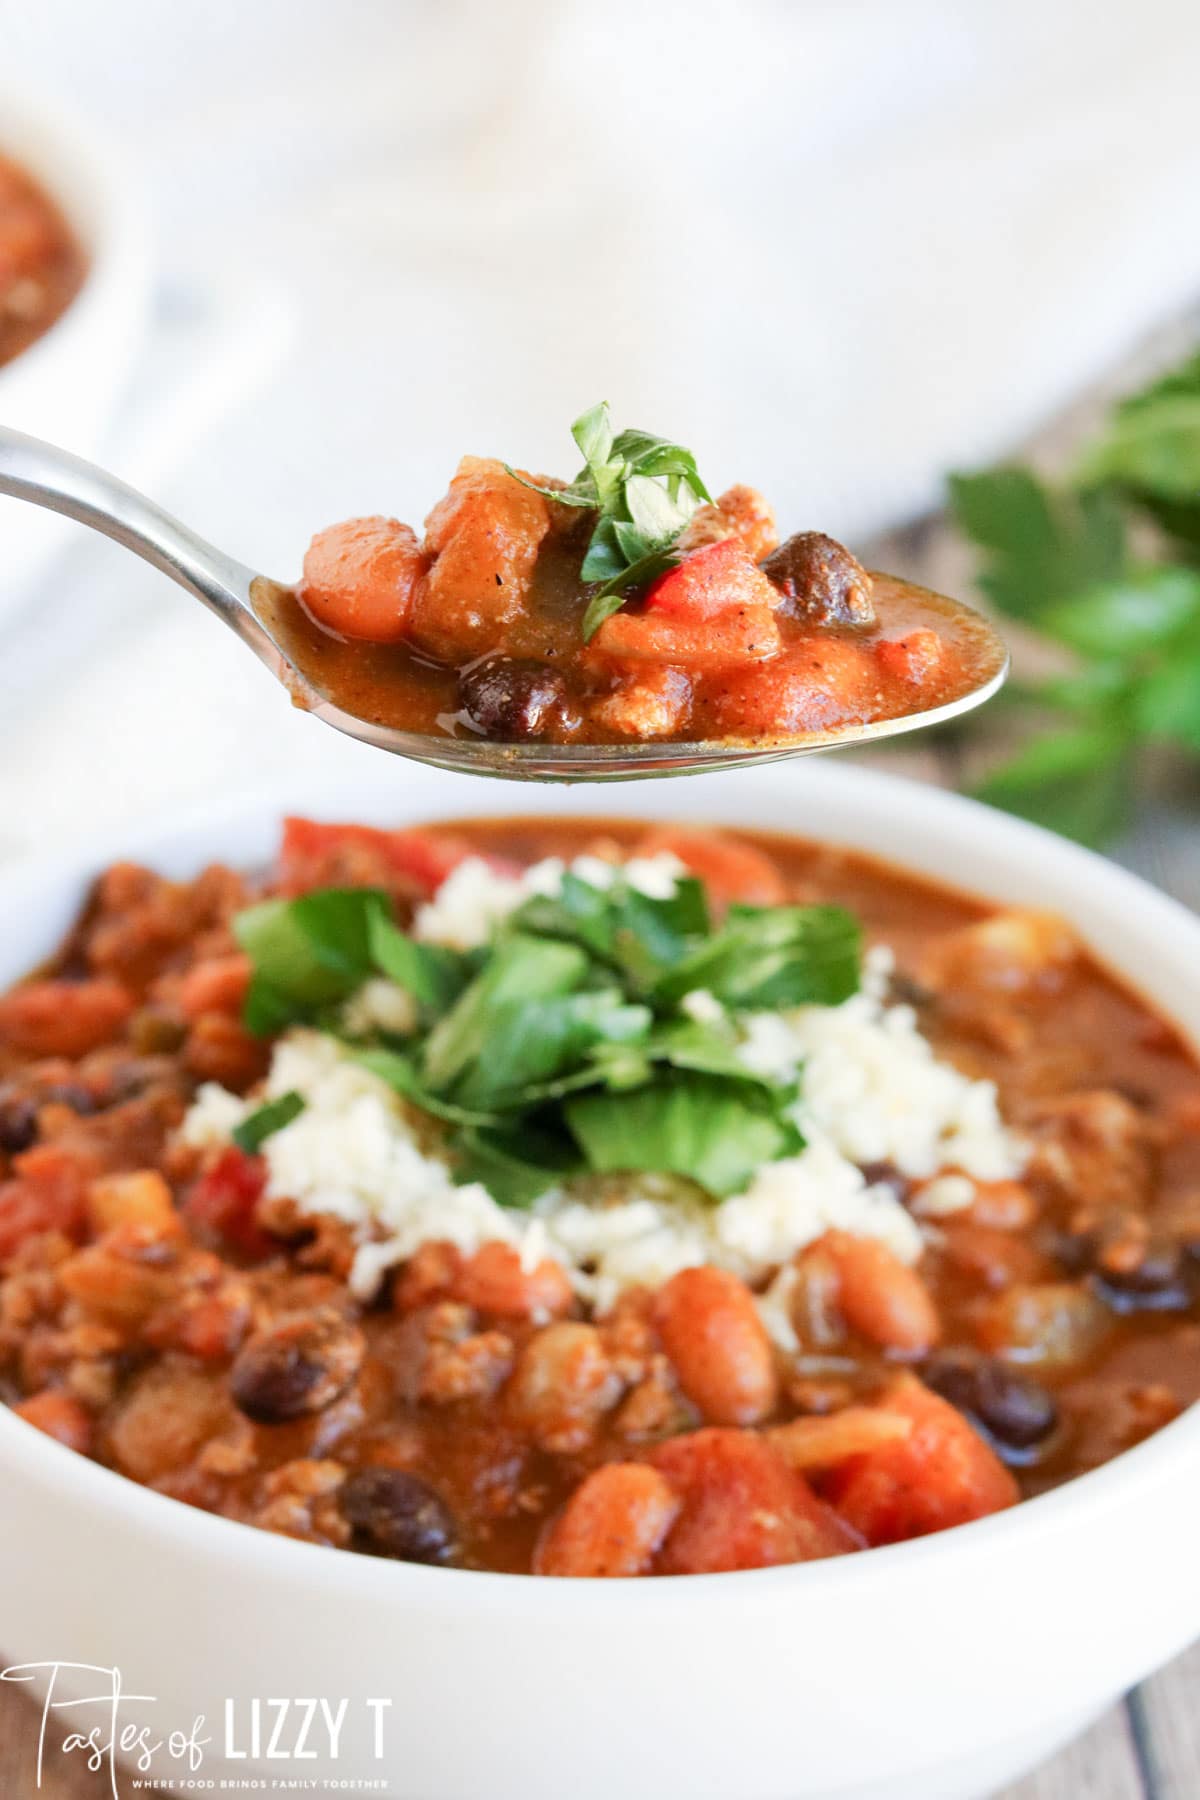 Pumpkin Chili Recipe With Ground Beef Or Turkey 30 Minute Meal